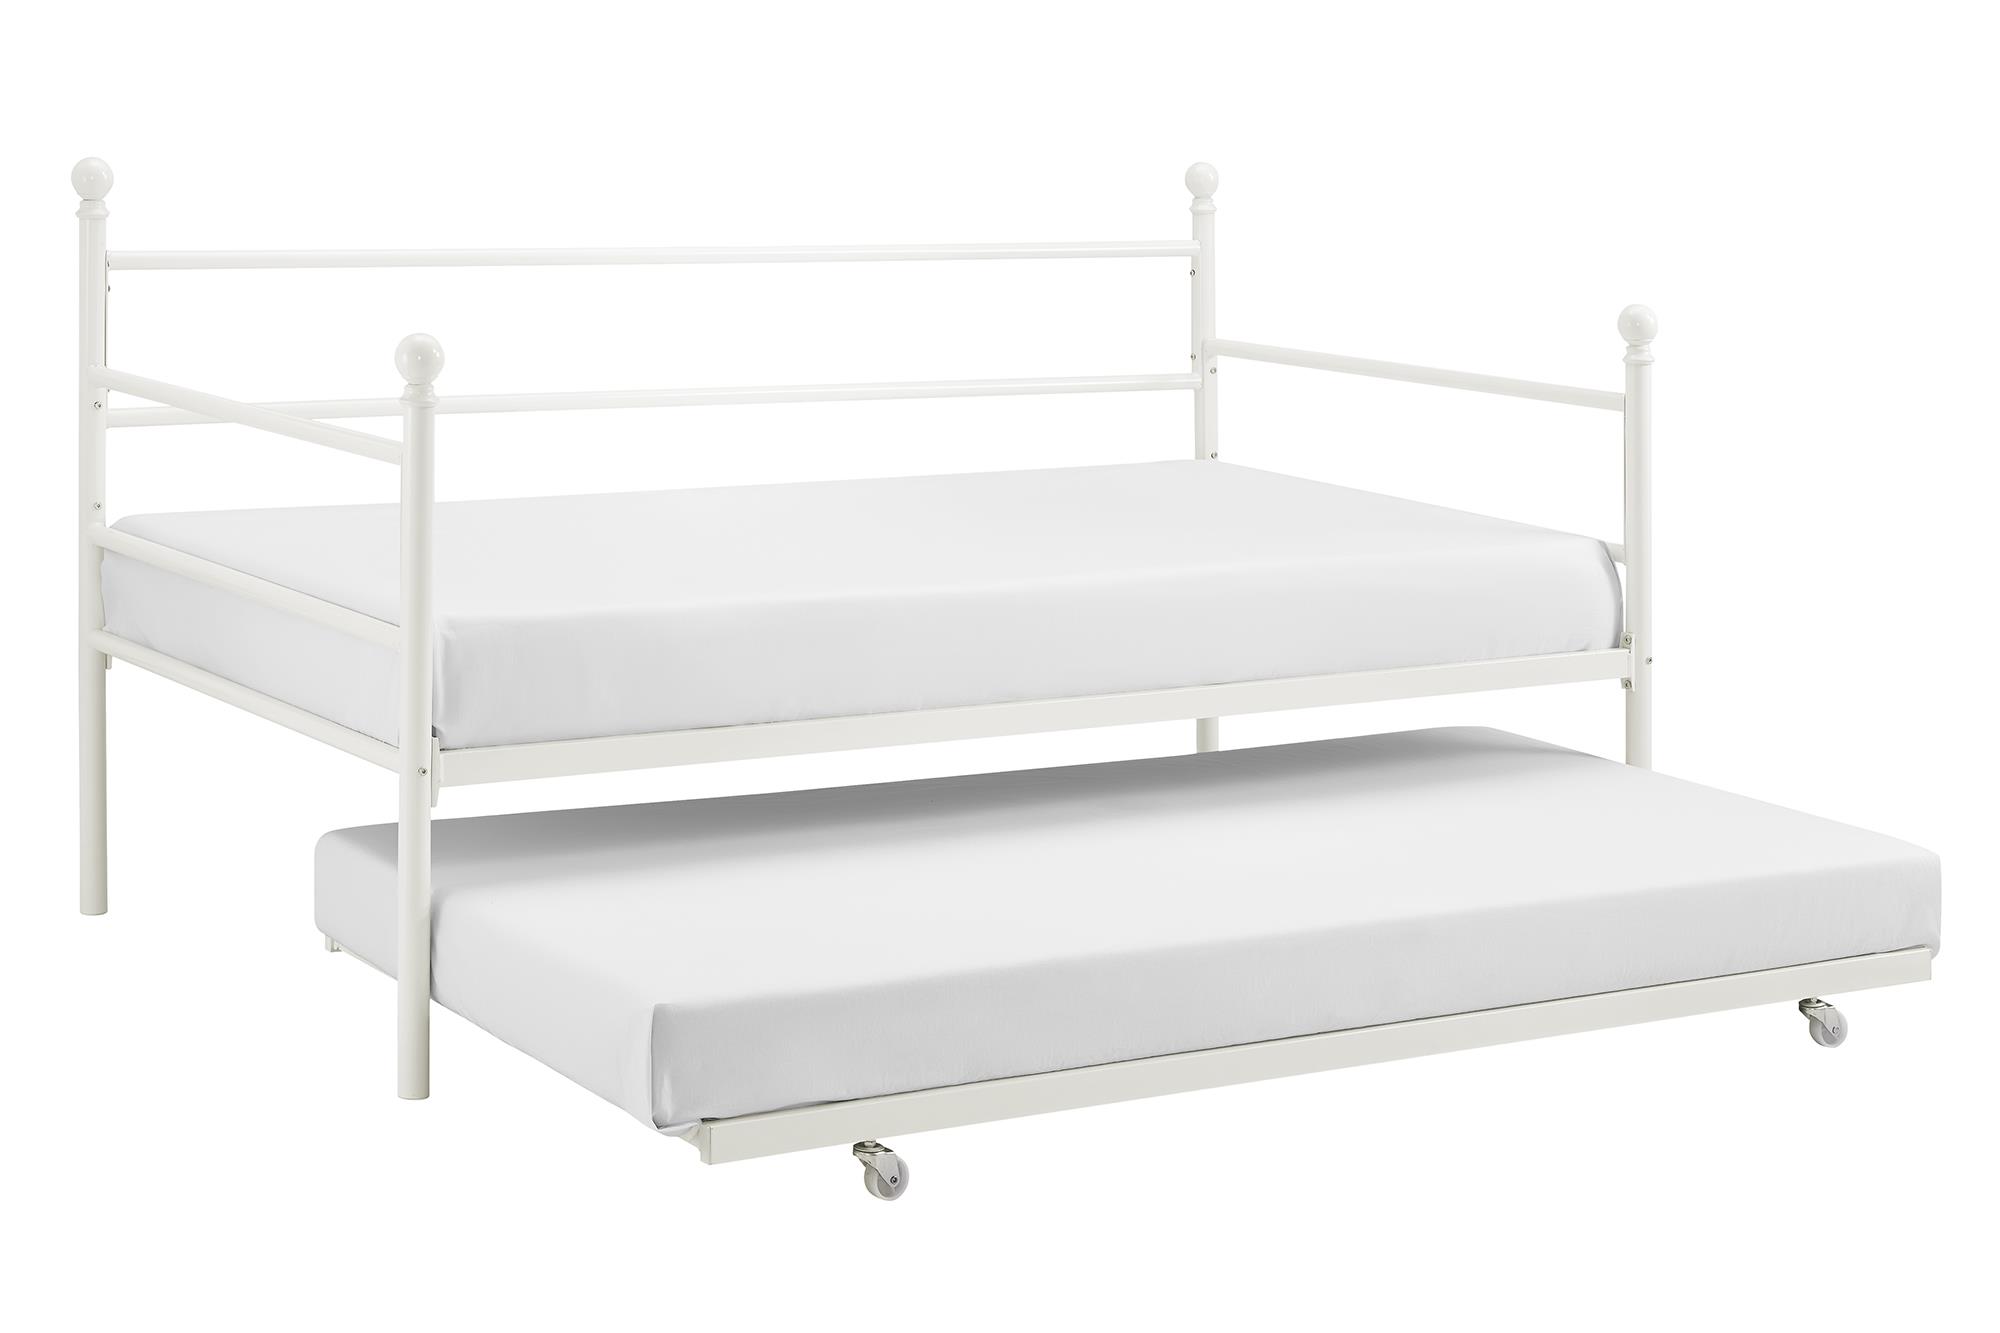 Mainstays Modern Metal Daybed with Trundle, Twin Size Frame, Off White - image 5 of 18